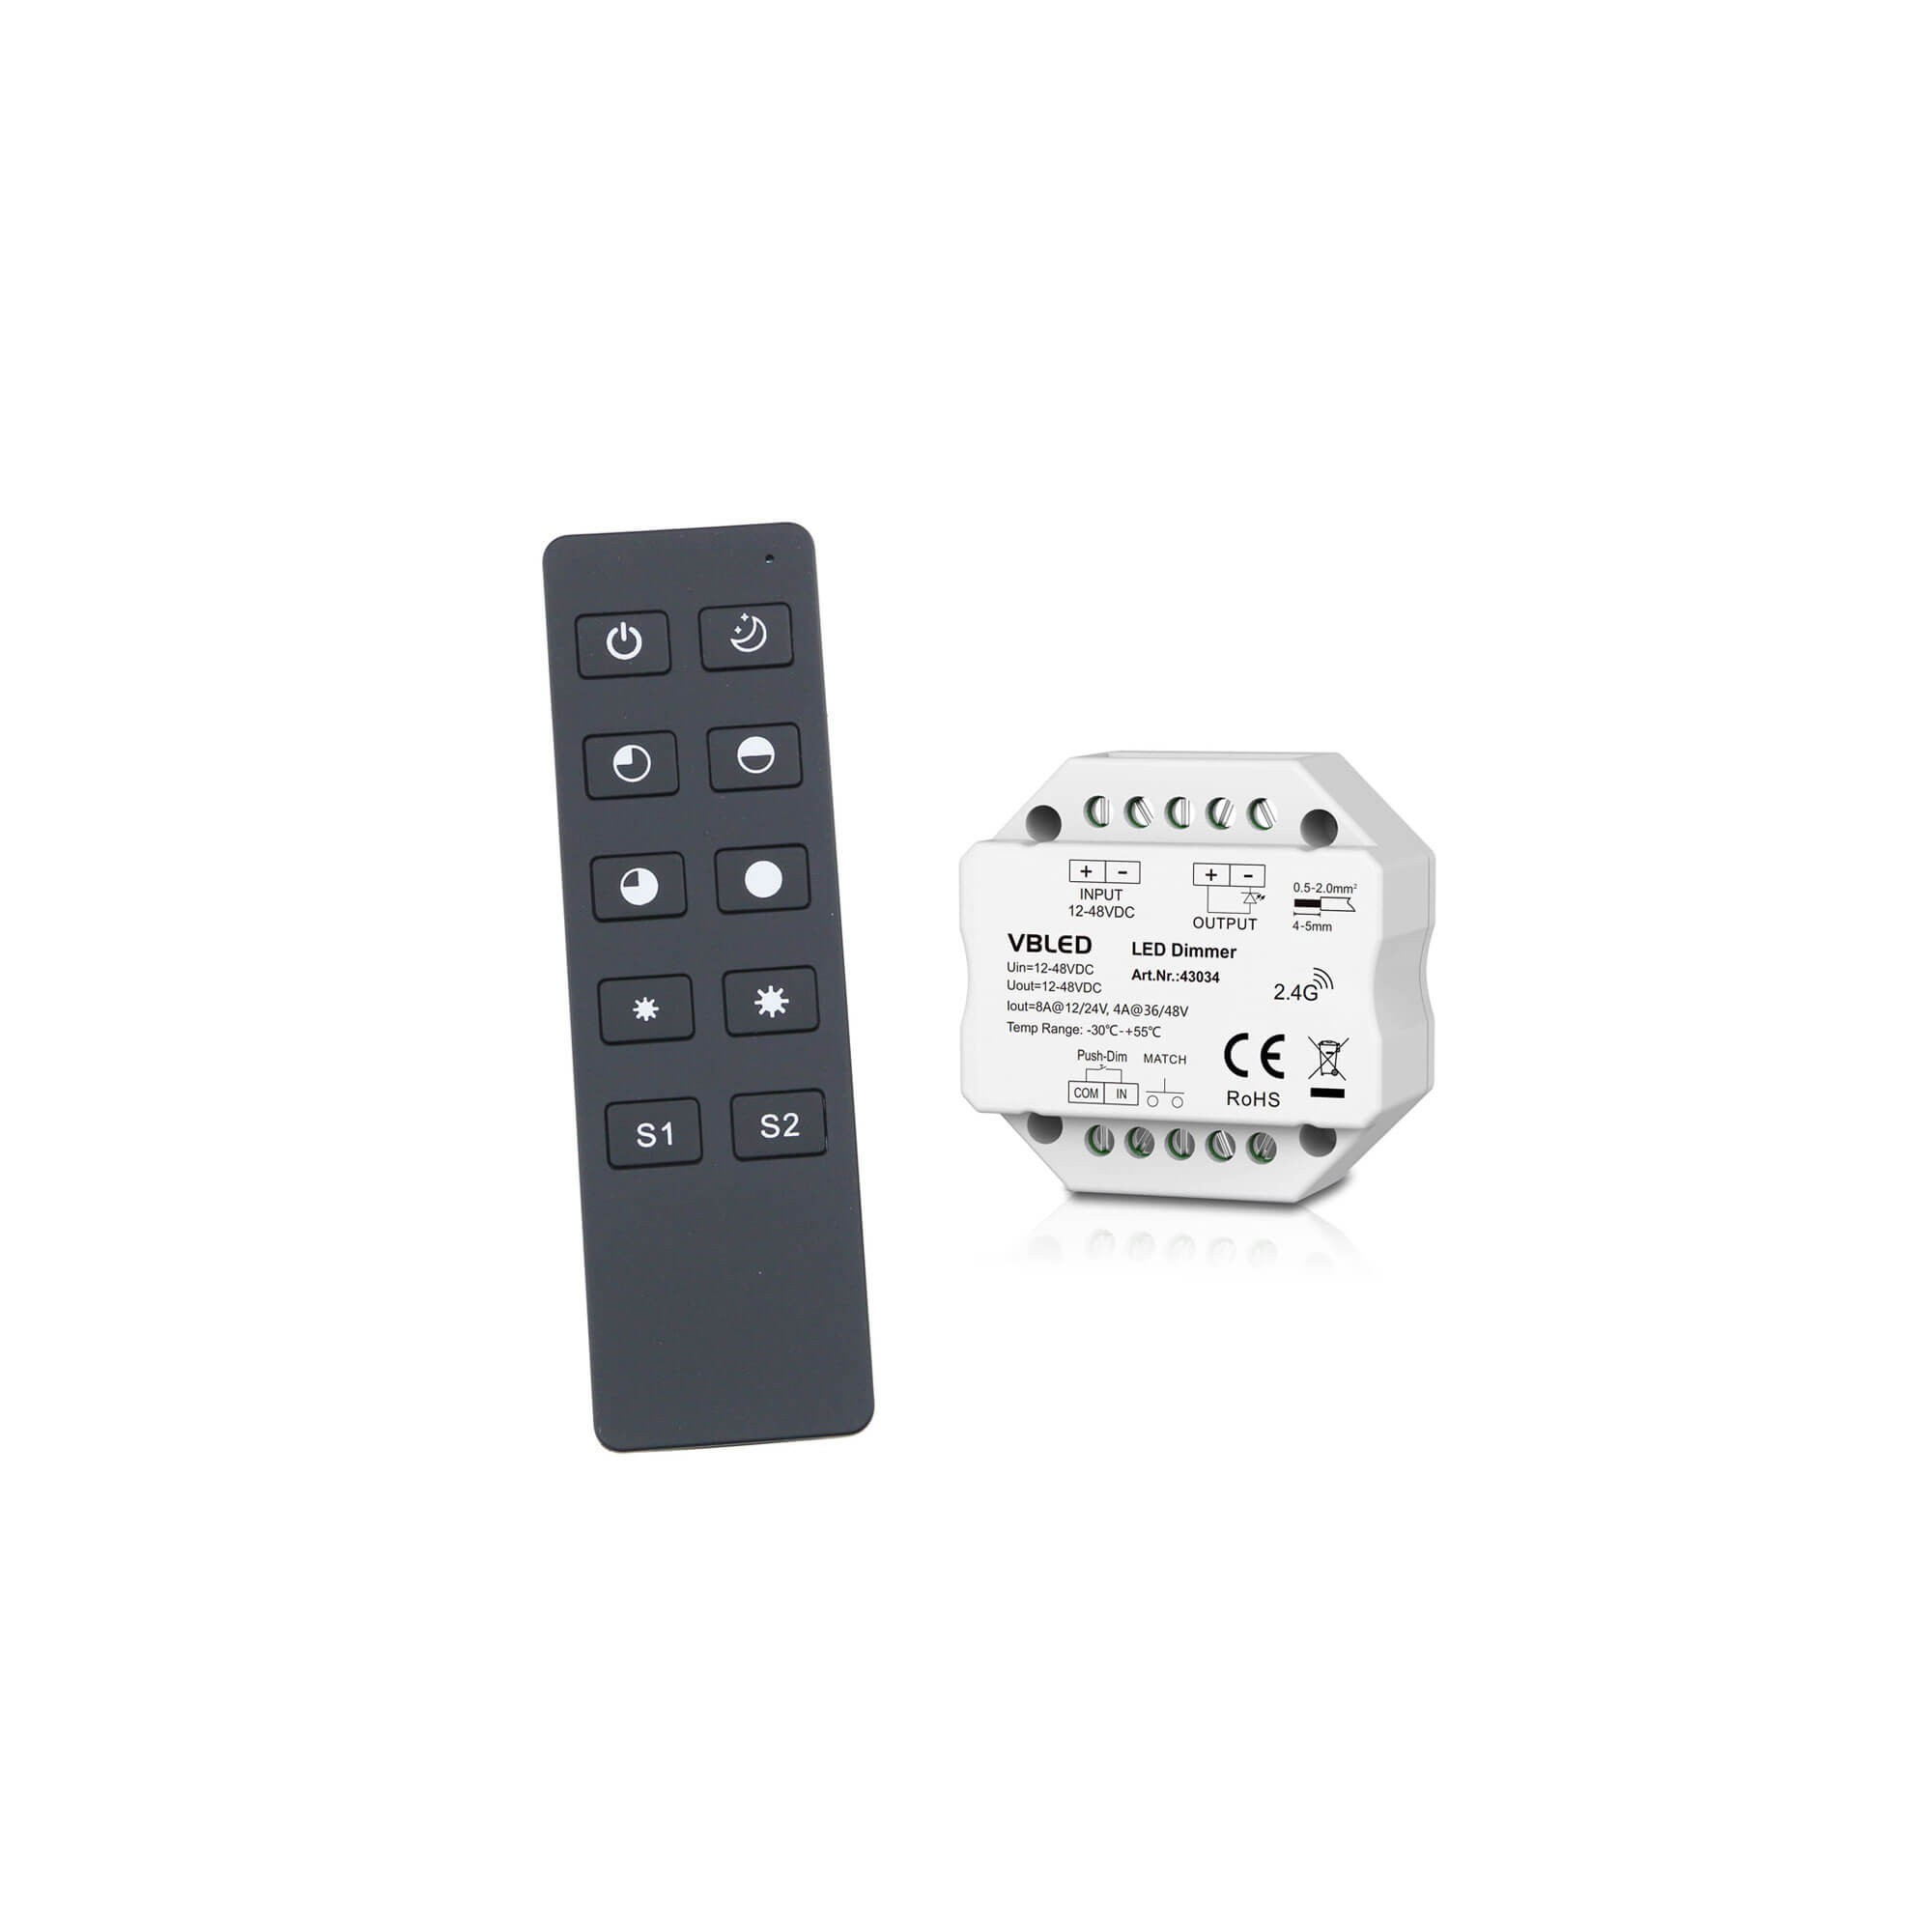 VBLED "INATUS" SET - Dimmer 12-48V DC incl 1-channel remote control